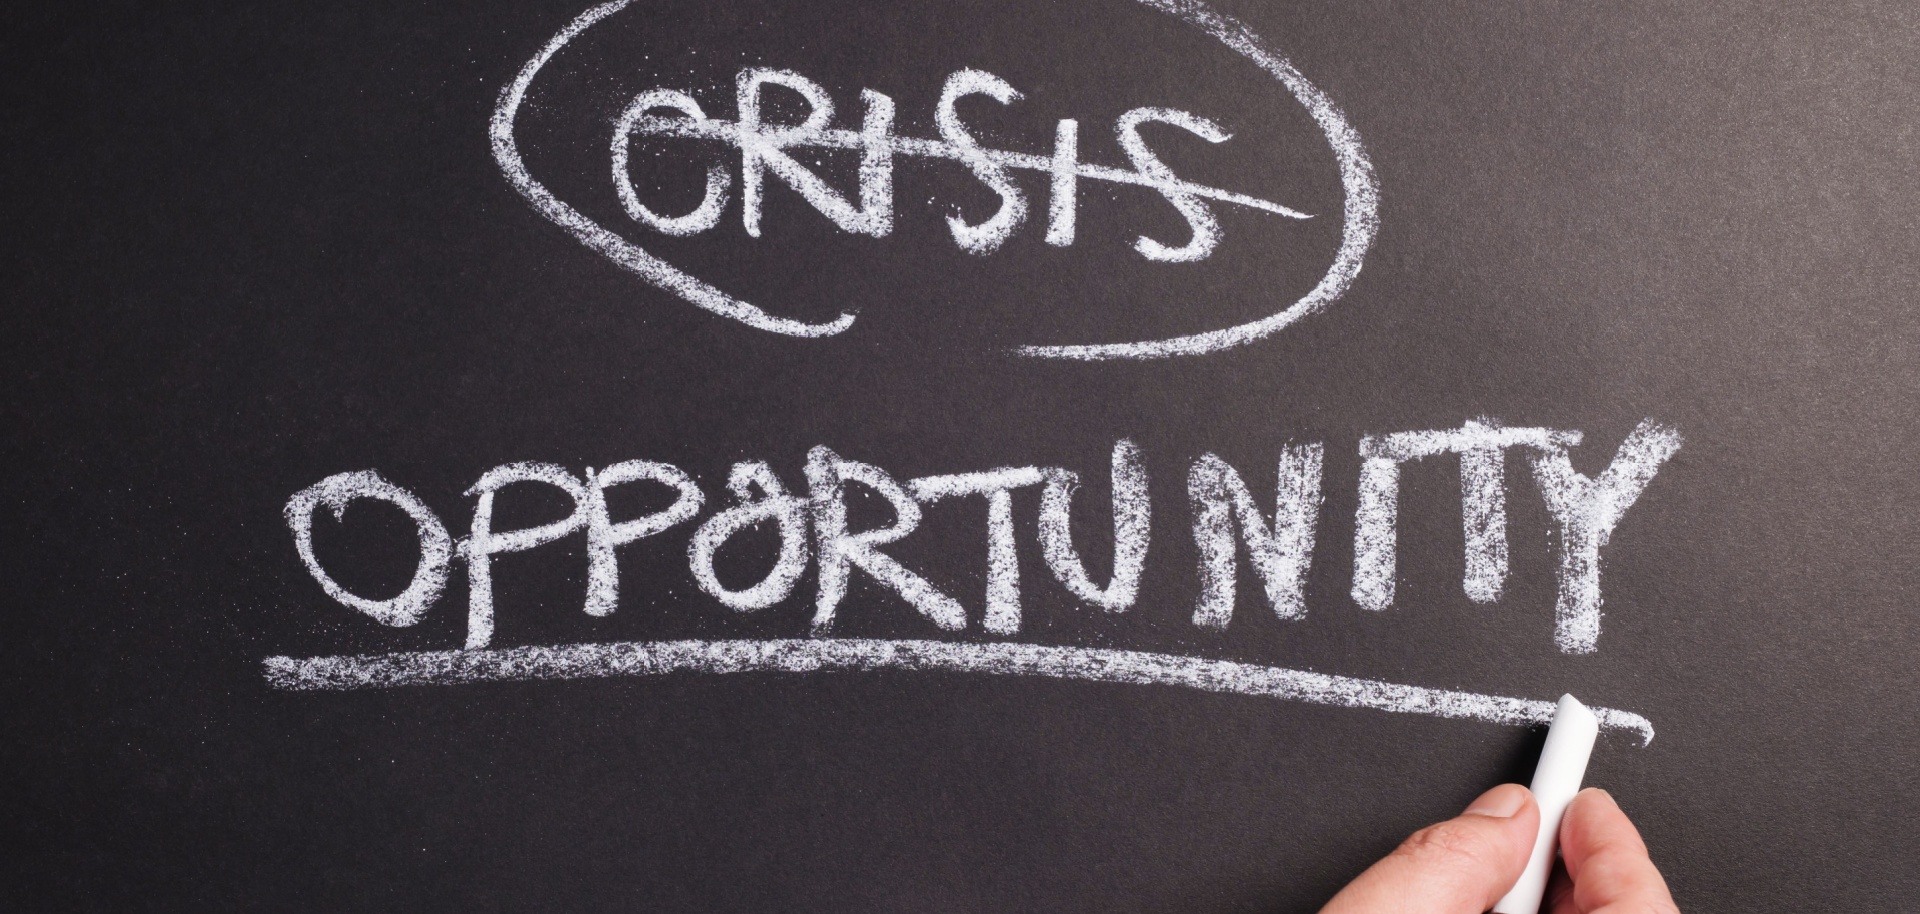 Crisis crossed out and showed that any crisis can change to an opportunity 